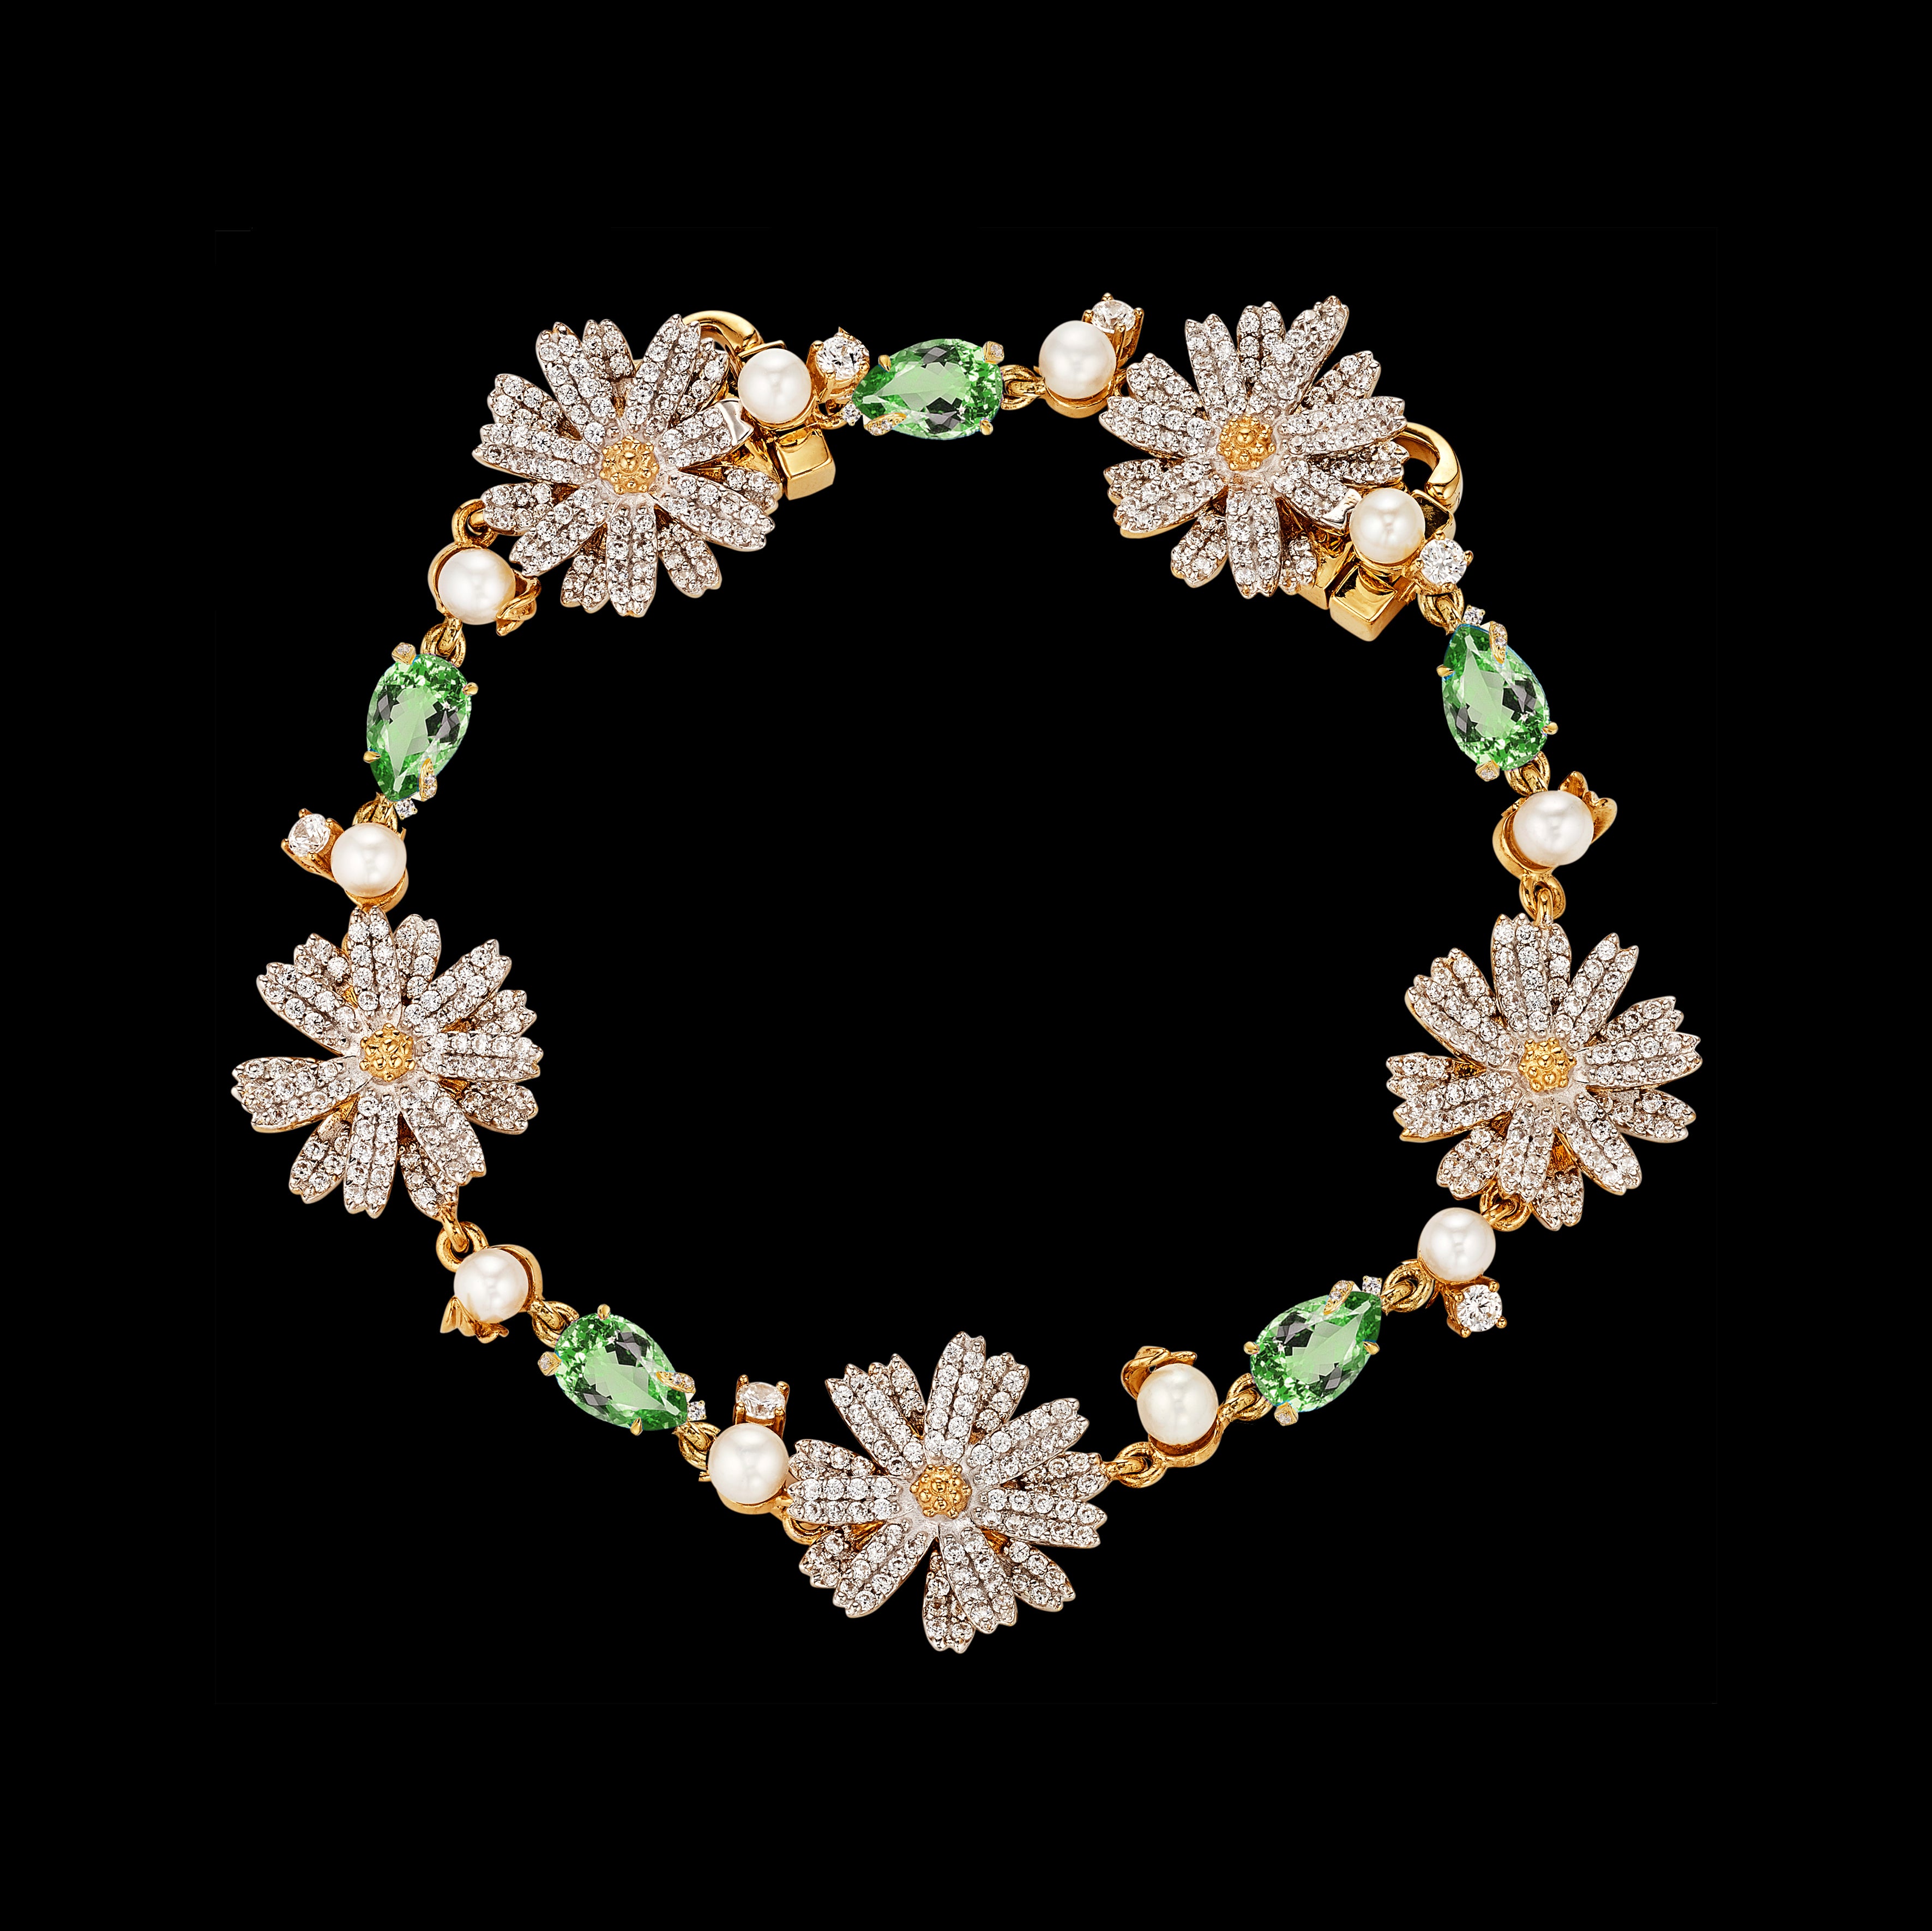 Peridot Daisy Diamond Bracelet, Bracelet, Anabela Chan Joaillerie - Fine jewelry with laboratory grown and created gemstones hand-crafted in the United Kingdom. Anabela Chan Joaillerie is the first fine jewellery brand in the world to champion laboratory-grown and created gemstones with high jewellery design, artisanal craftsmanship and a focus on ethical and sustainable innovations.